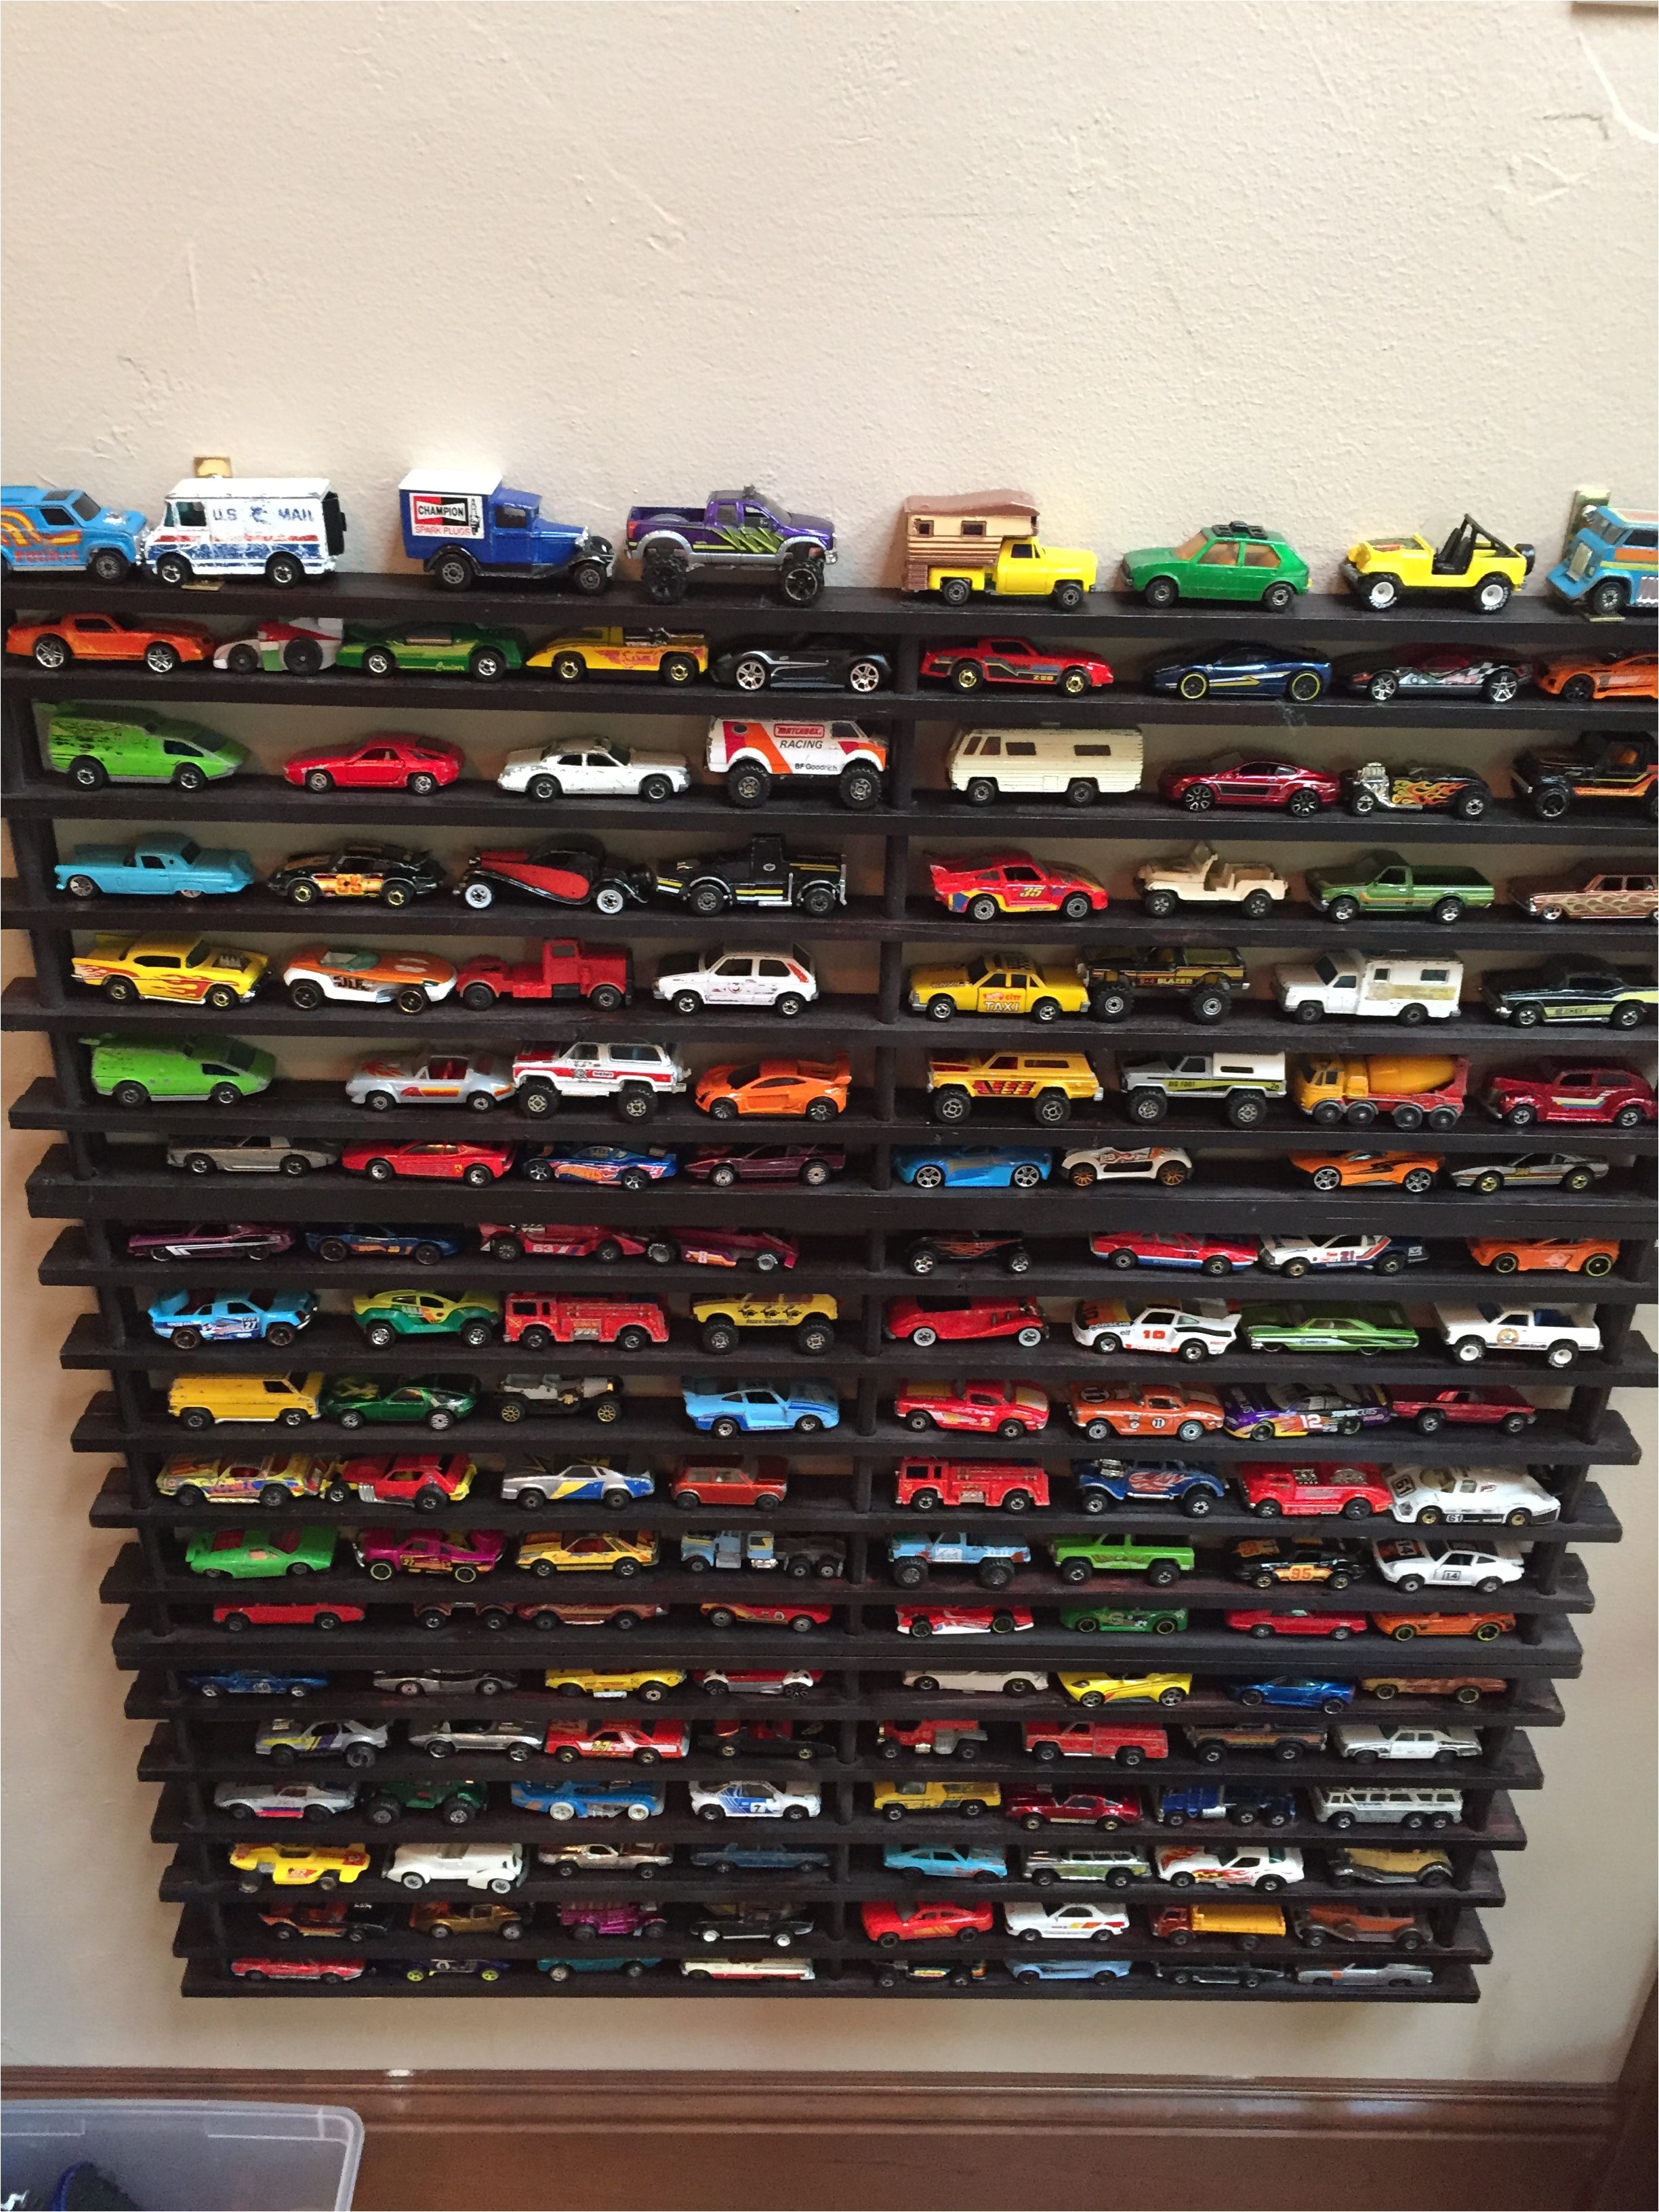 matchbox car storage a creating a super cool shelf to corral all those hot wheel cars made from wooden